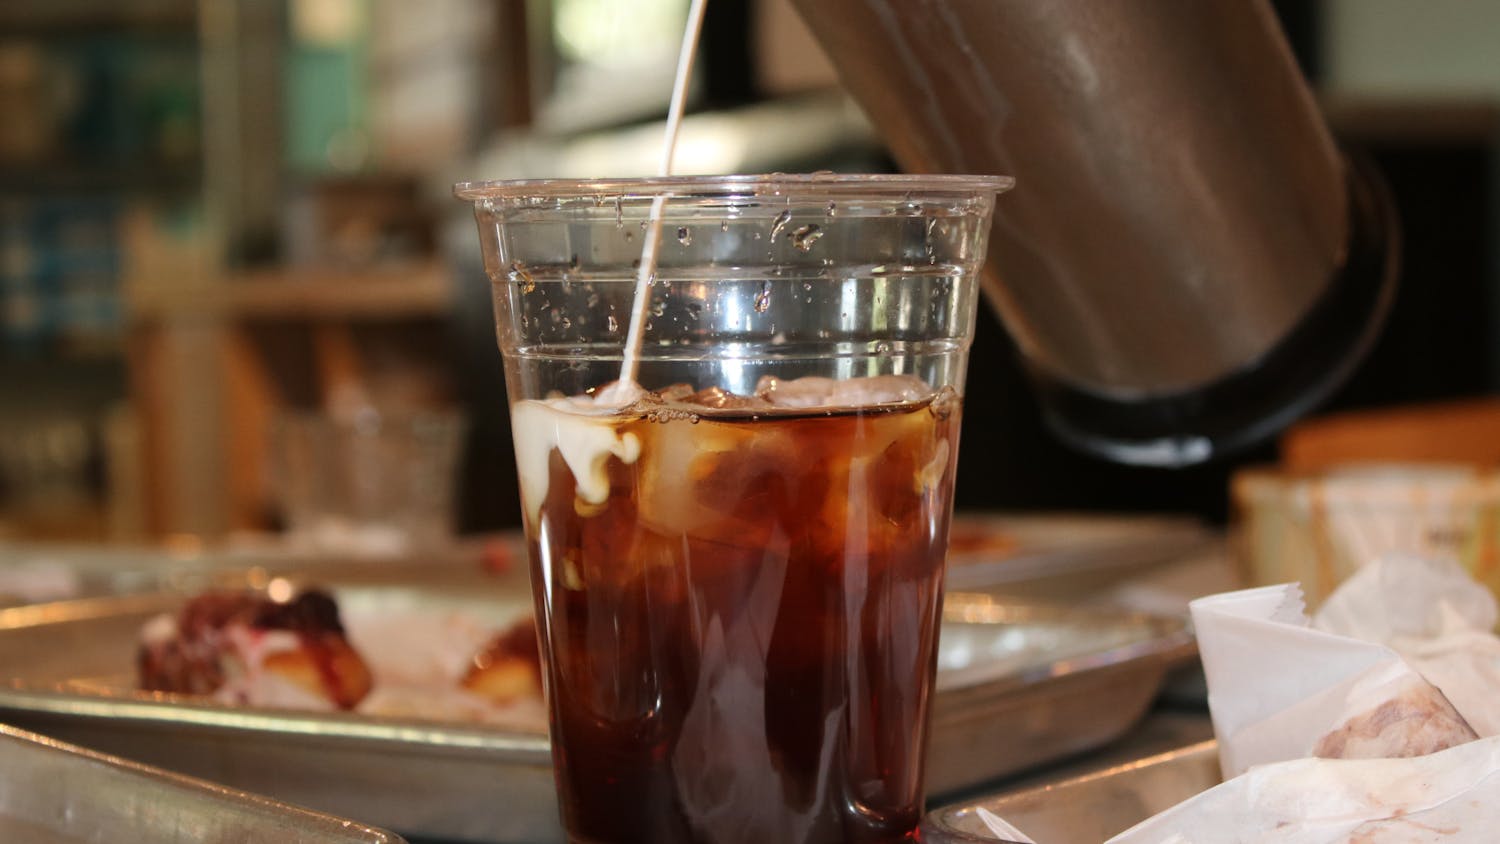 A photo of The Devine Cinnamon Roll Deli's locally sourced ice coffee on Sept. 6. Owner Jody Kreush sources from a South Carolina local who farms the beans in Brazil and brews the coffee right here in Columbia.&nbsp;